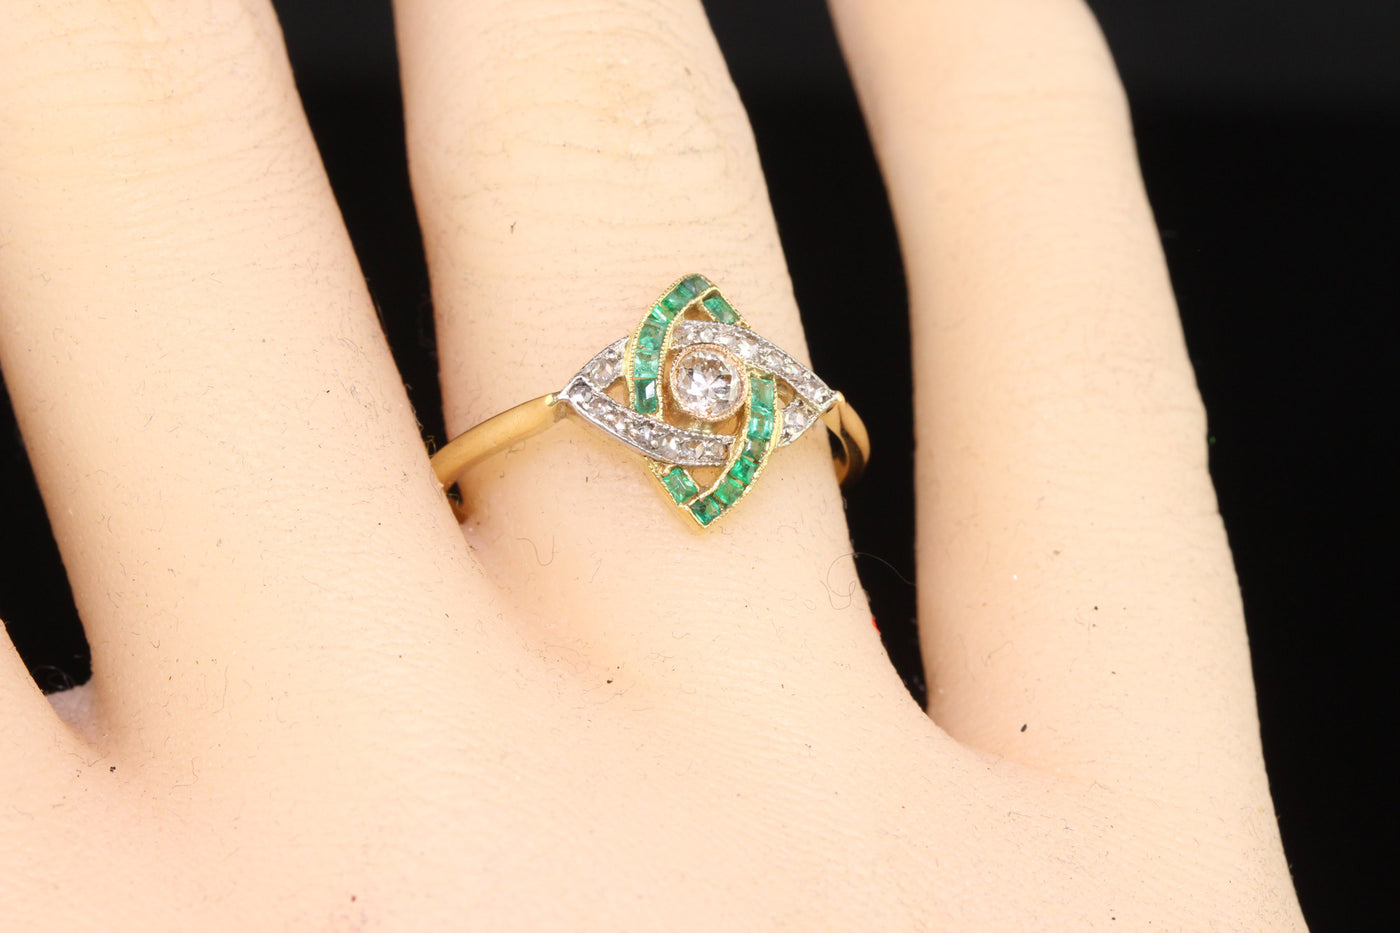 Antique Art Deco 18K Yellow Gold Old Cut Diamond and Emerald Pattern Ring